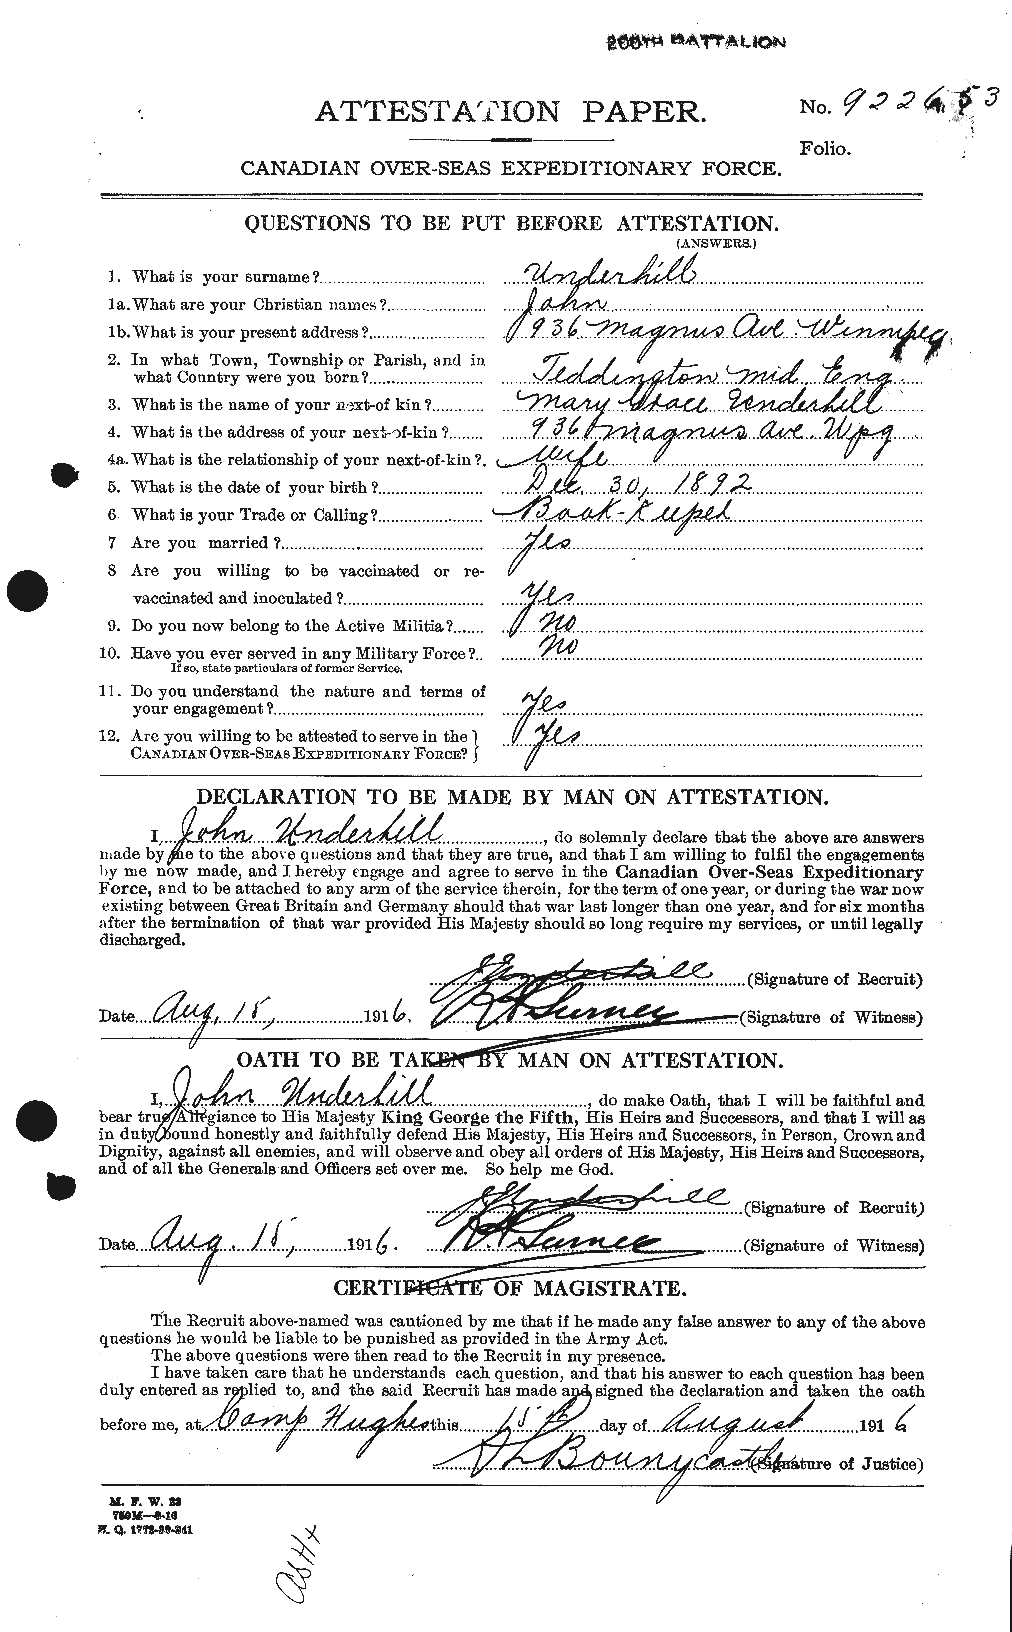 Personnel Records of the First World War - CEF 647105a